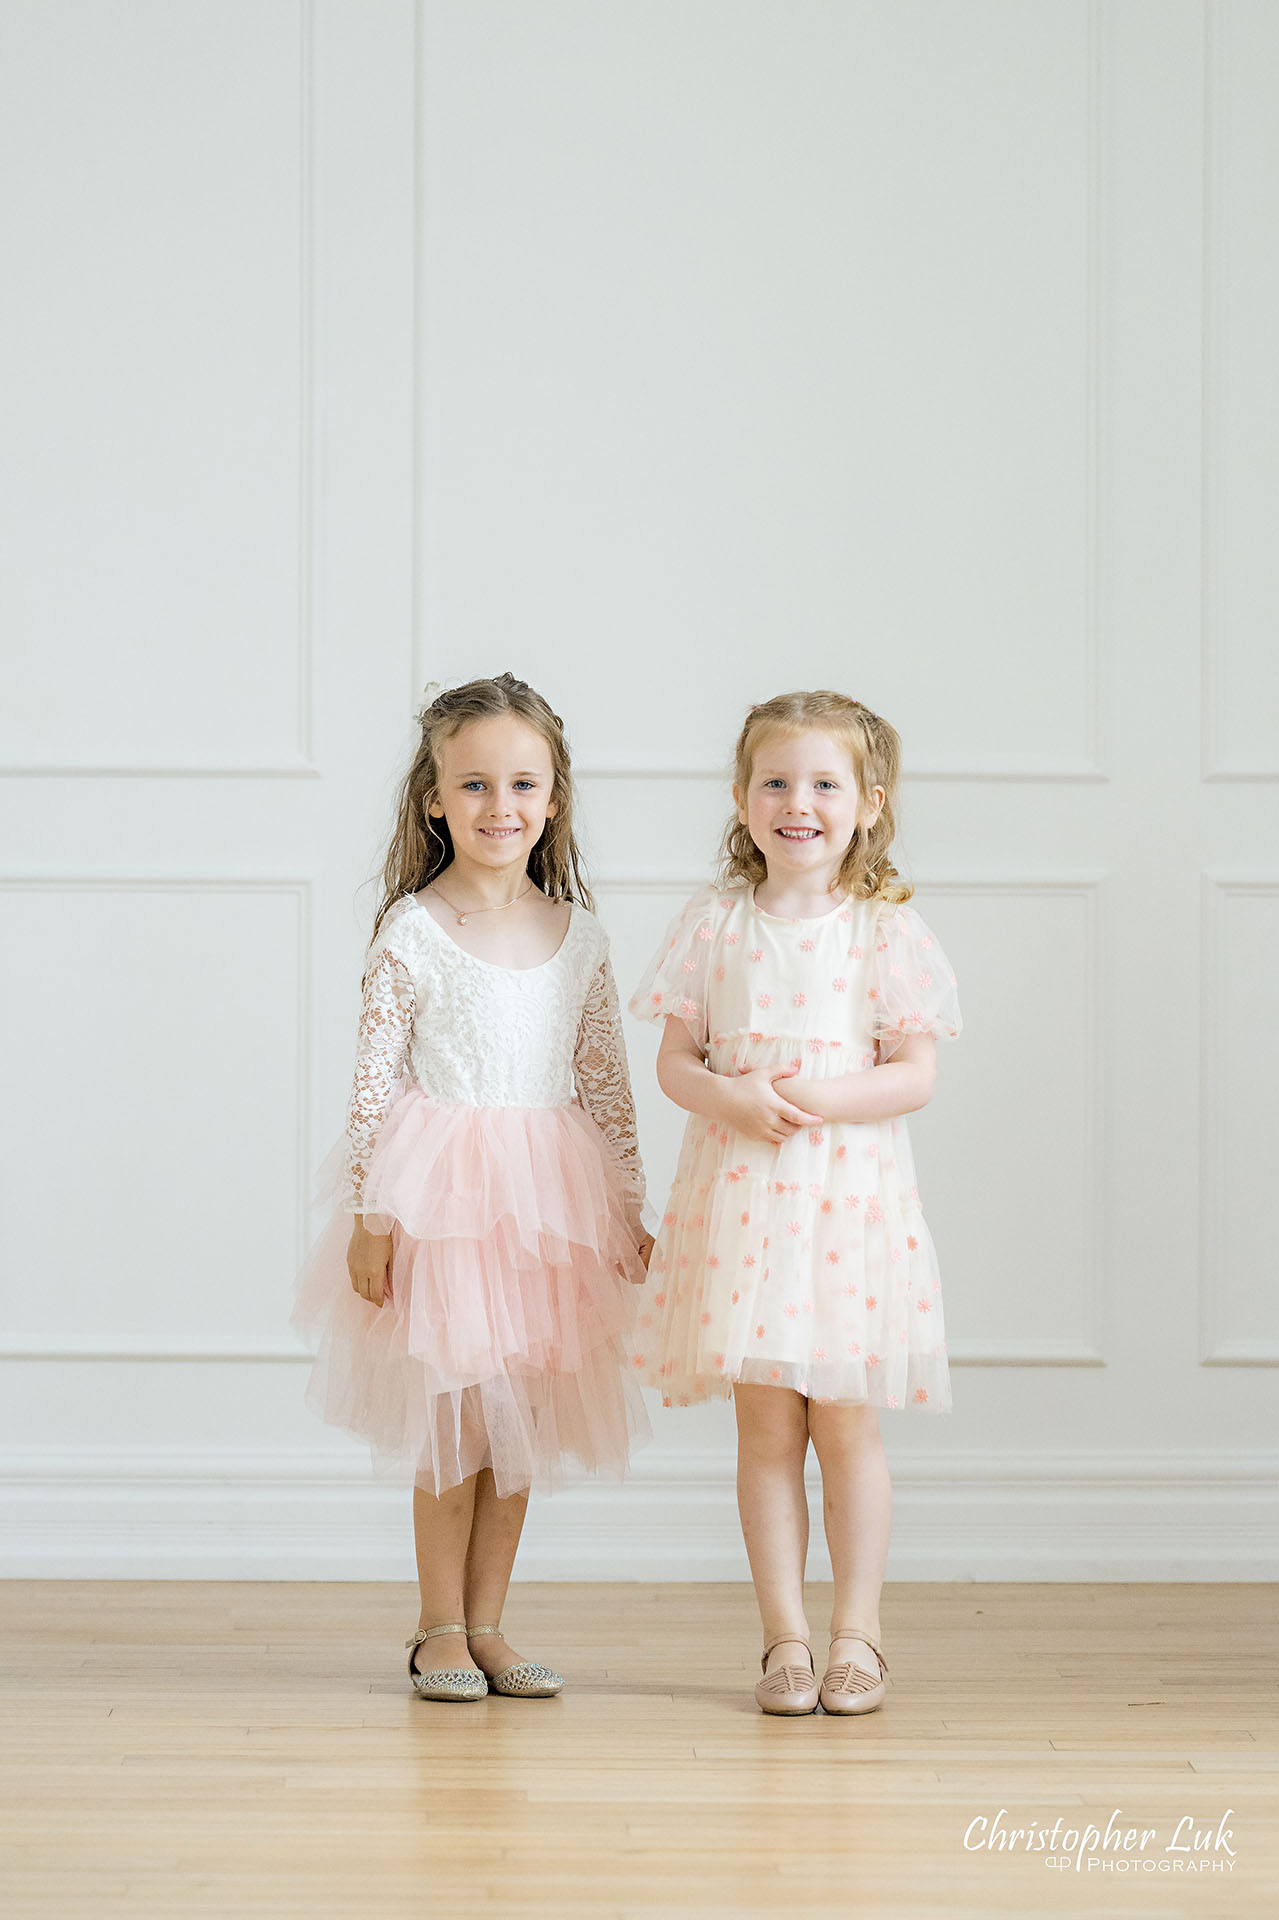 Cousins Sisters Daughters Girls White Pink Dresses Smile Portrait